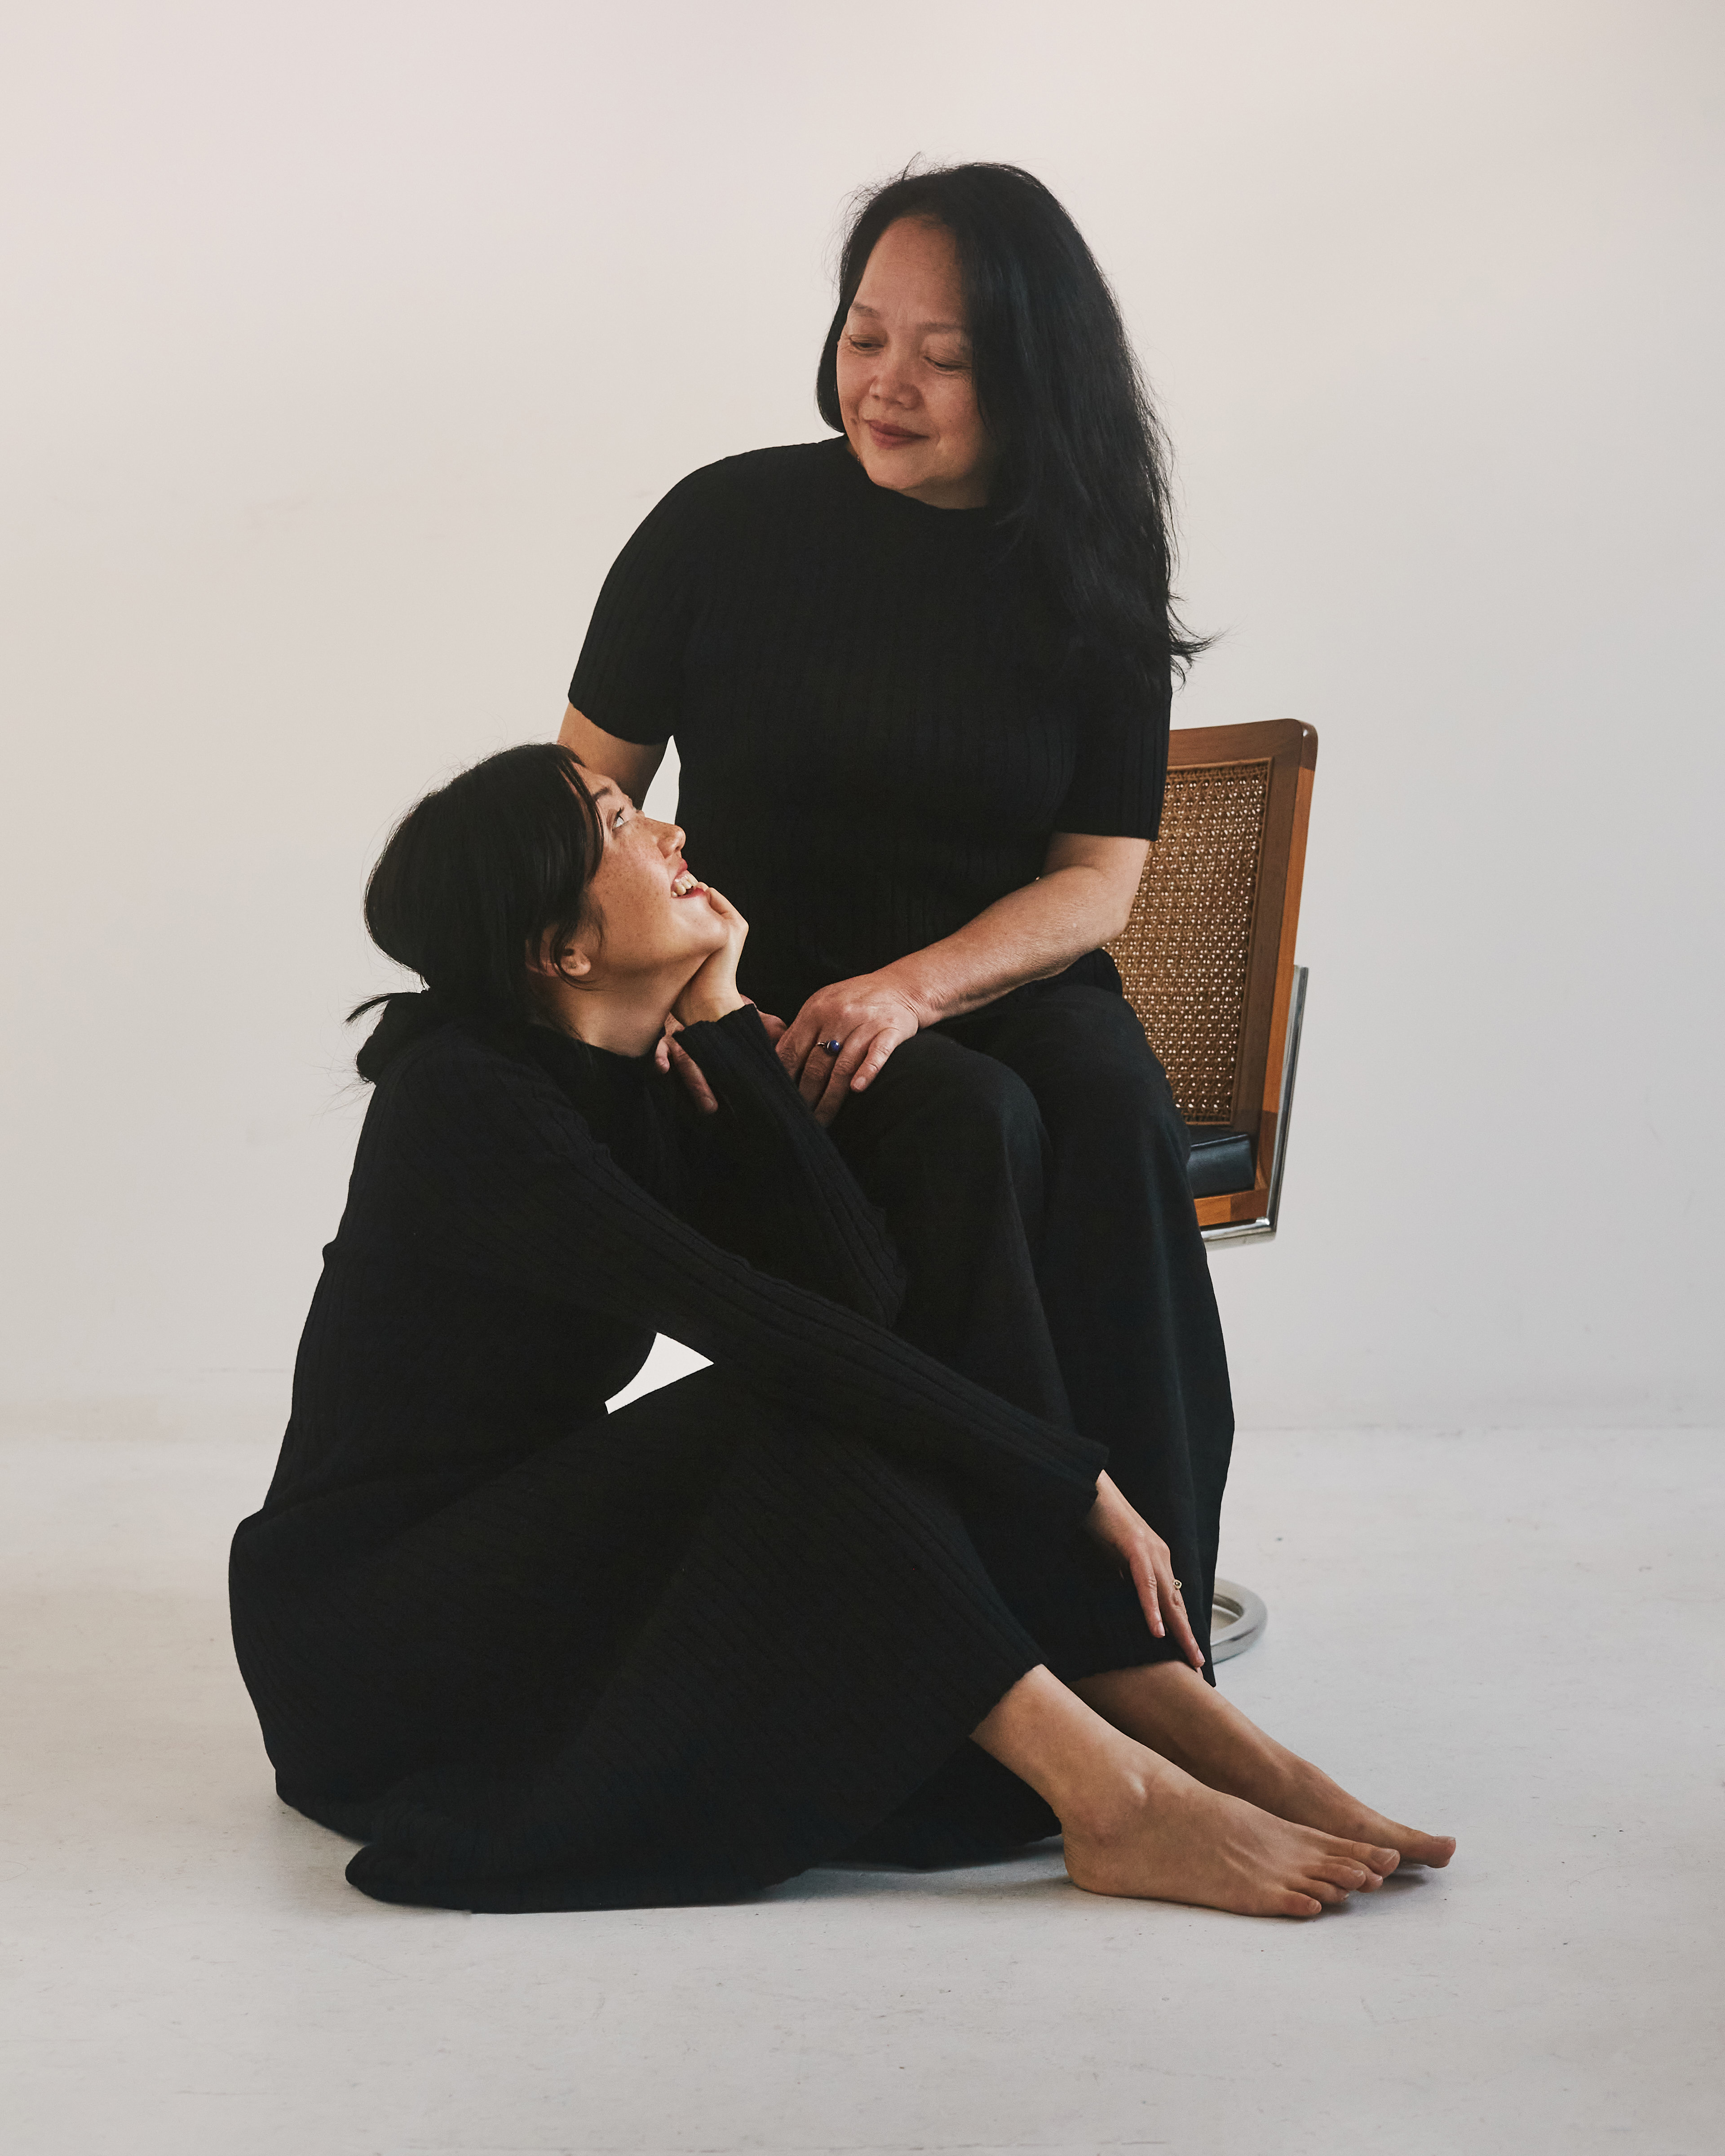 Rainbow, a 30-something Chinese Australian, sits at her mother Irene's feet and smiles up at her. Both are wearing all black.